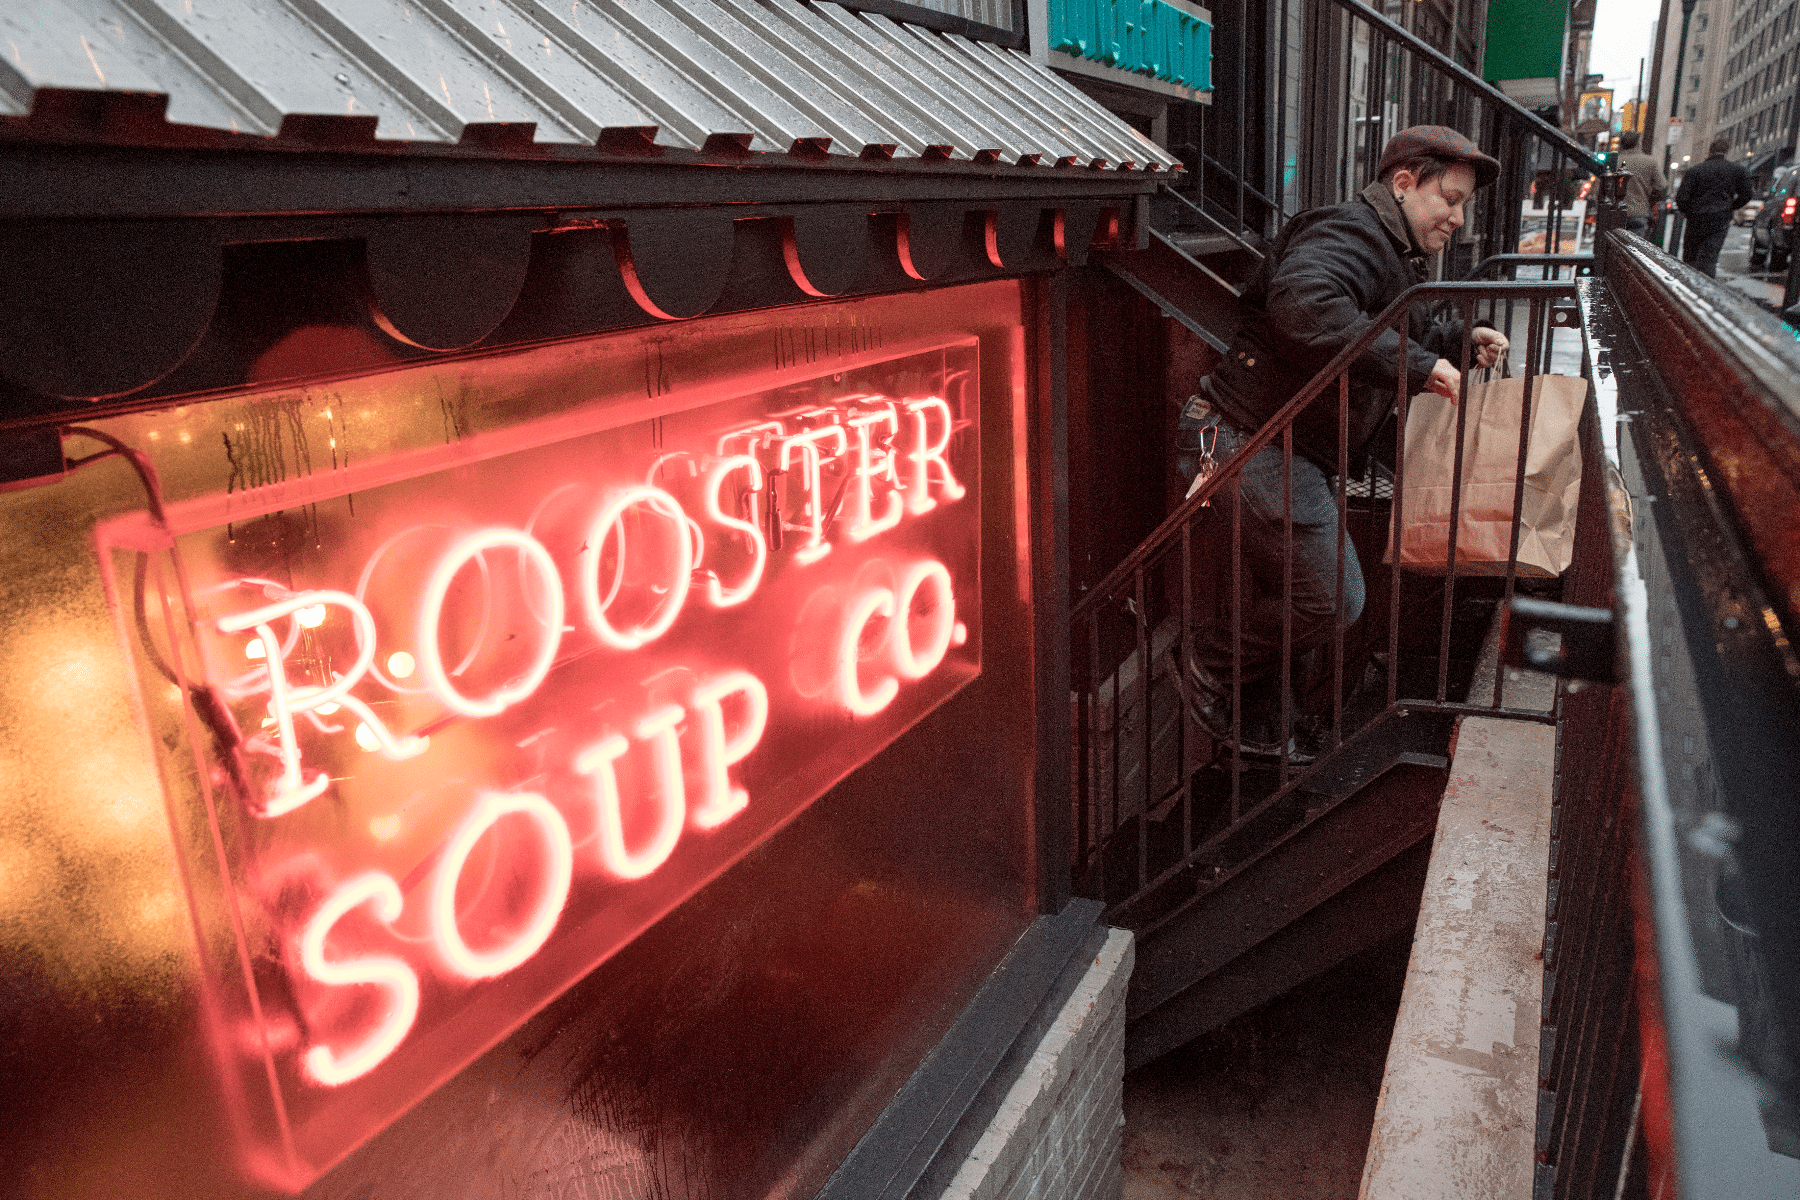 Rooster Soup Co. in Philadelphia has found success with an altruistic business model. 